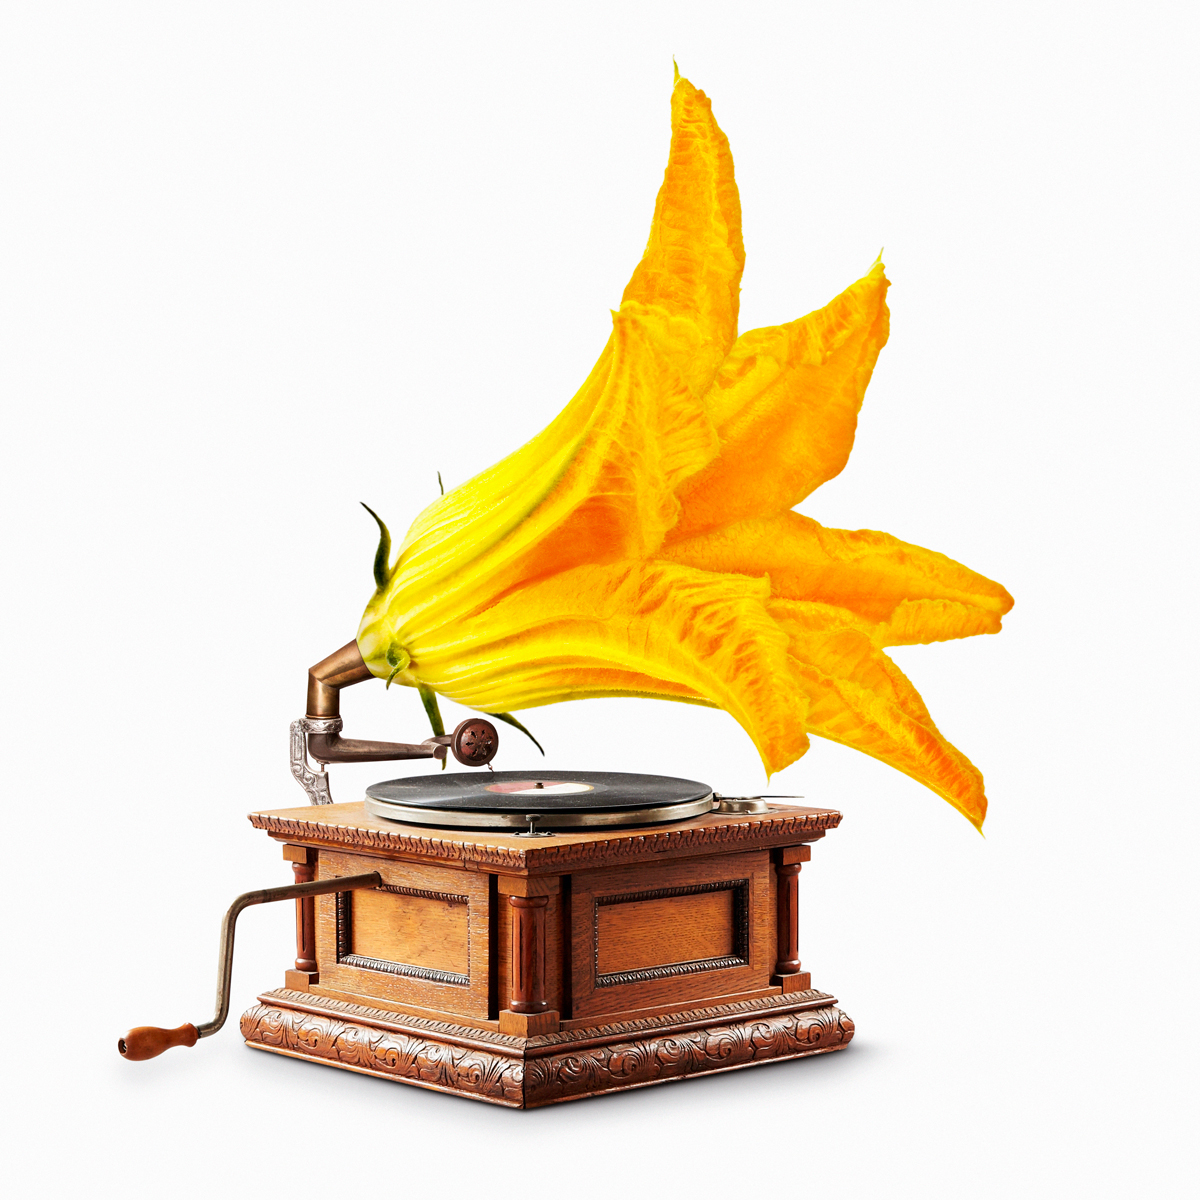 Vintage gramophone whose trumpet is replaced by a yellow cone-shaped flower to celebrate the arrival of Spring